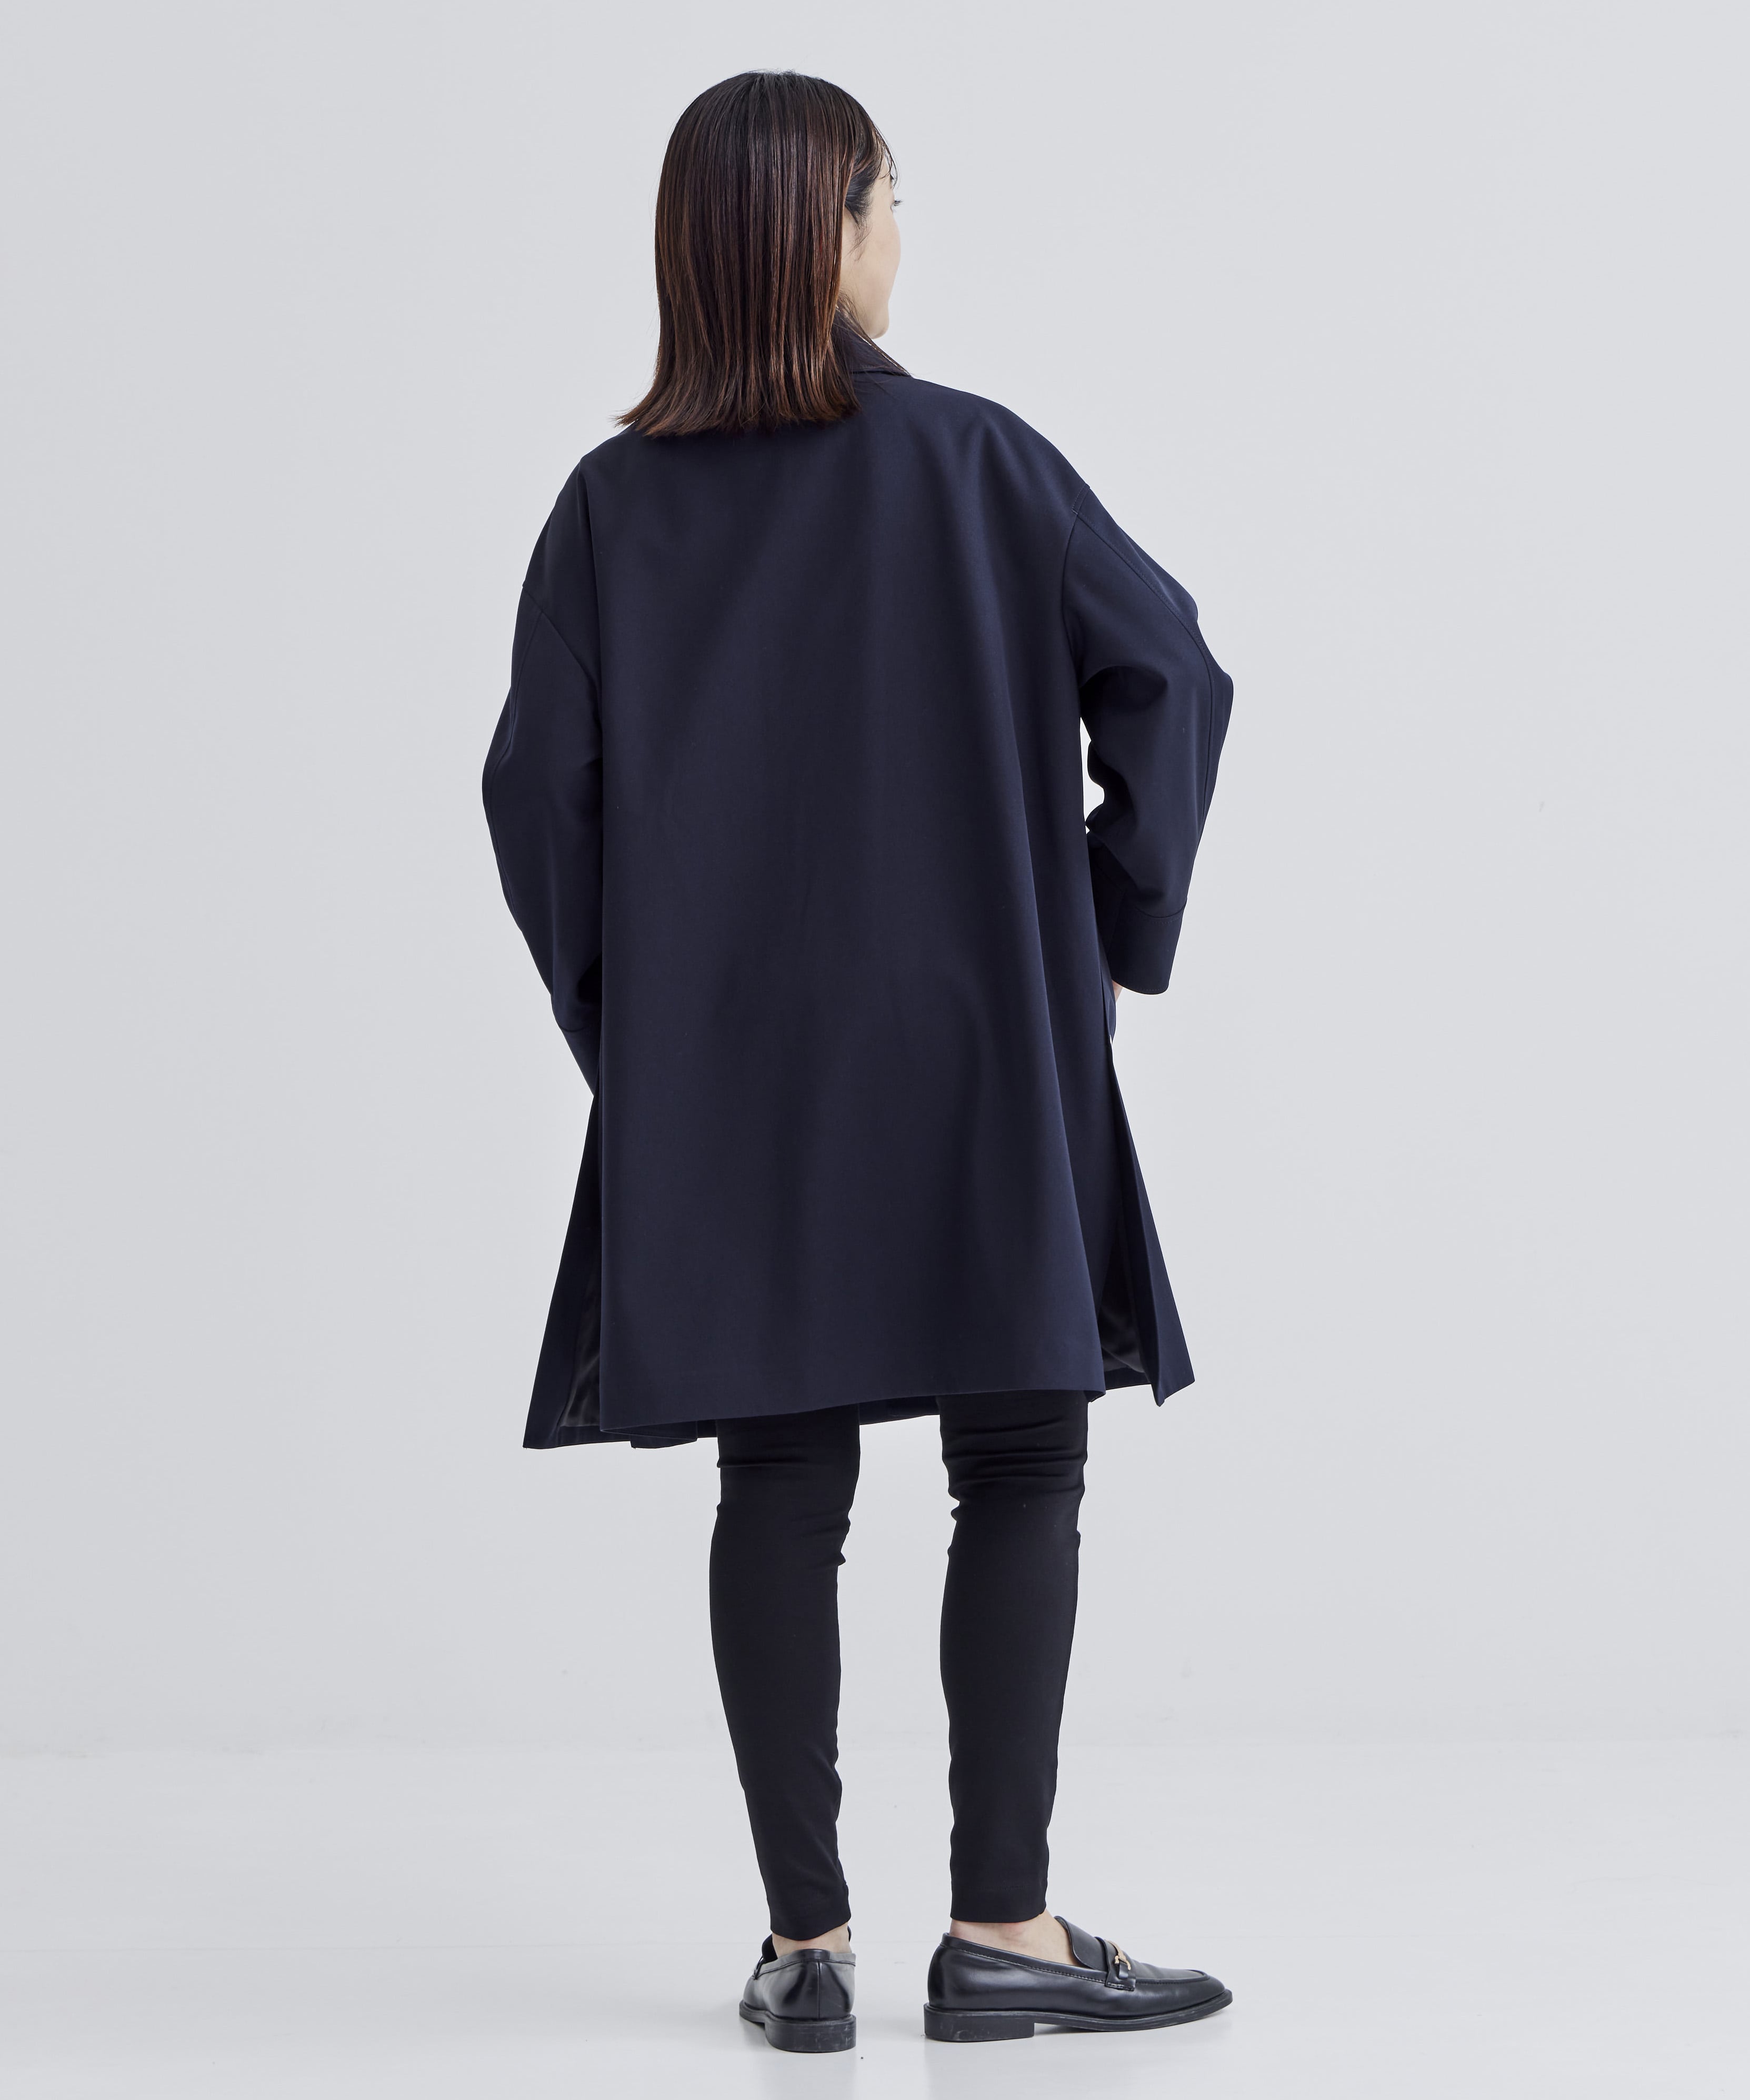 THE MIDDLE BAL COLLAR COAT｜ THE RERACS